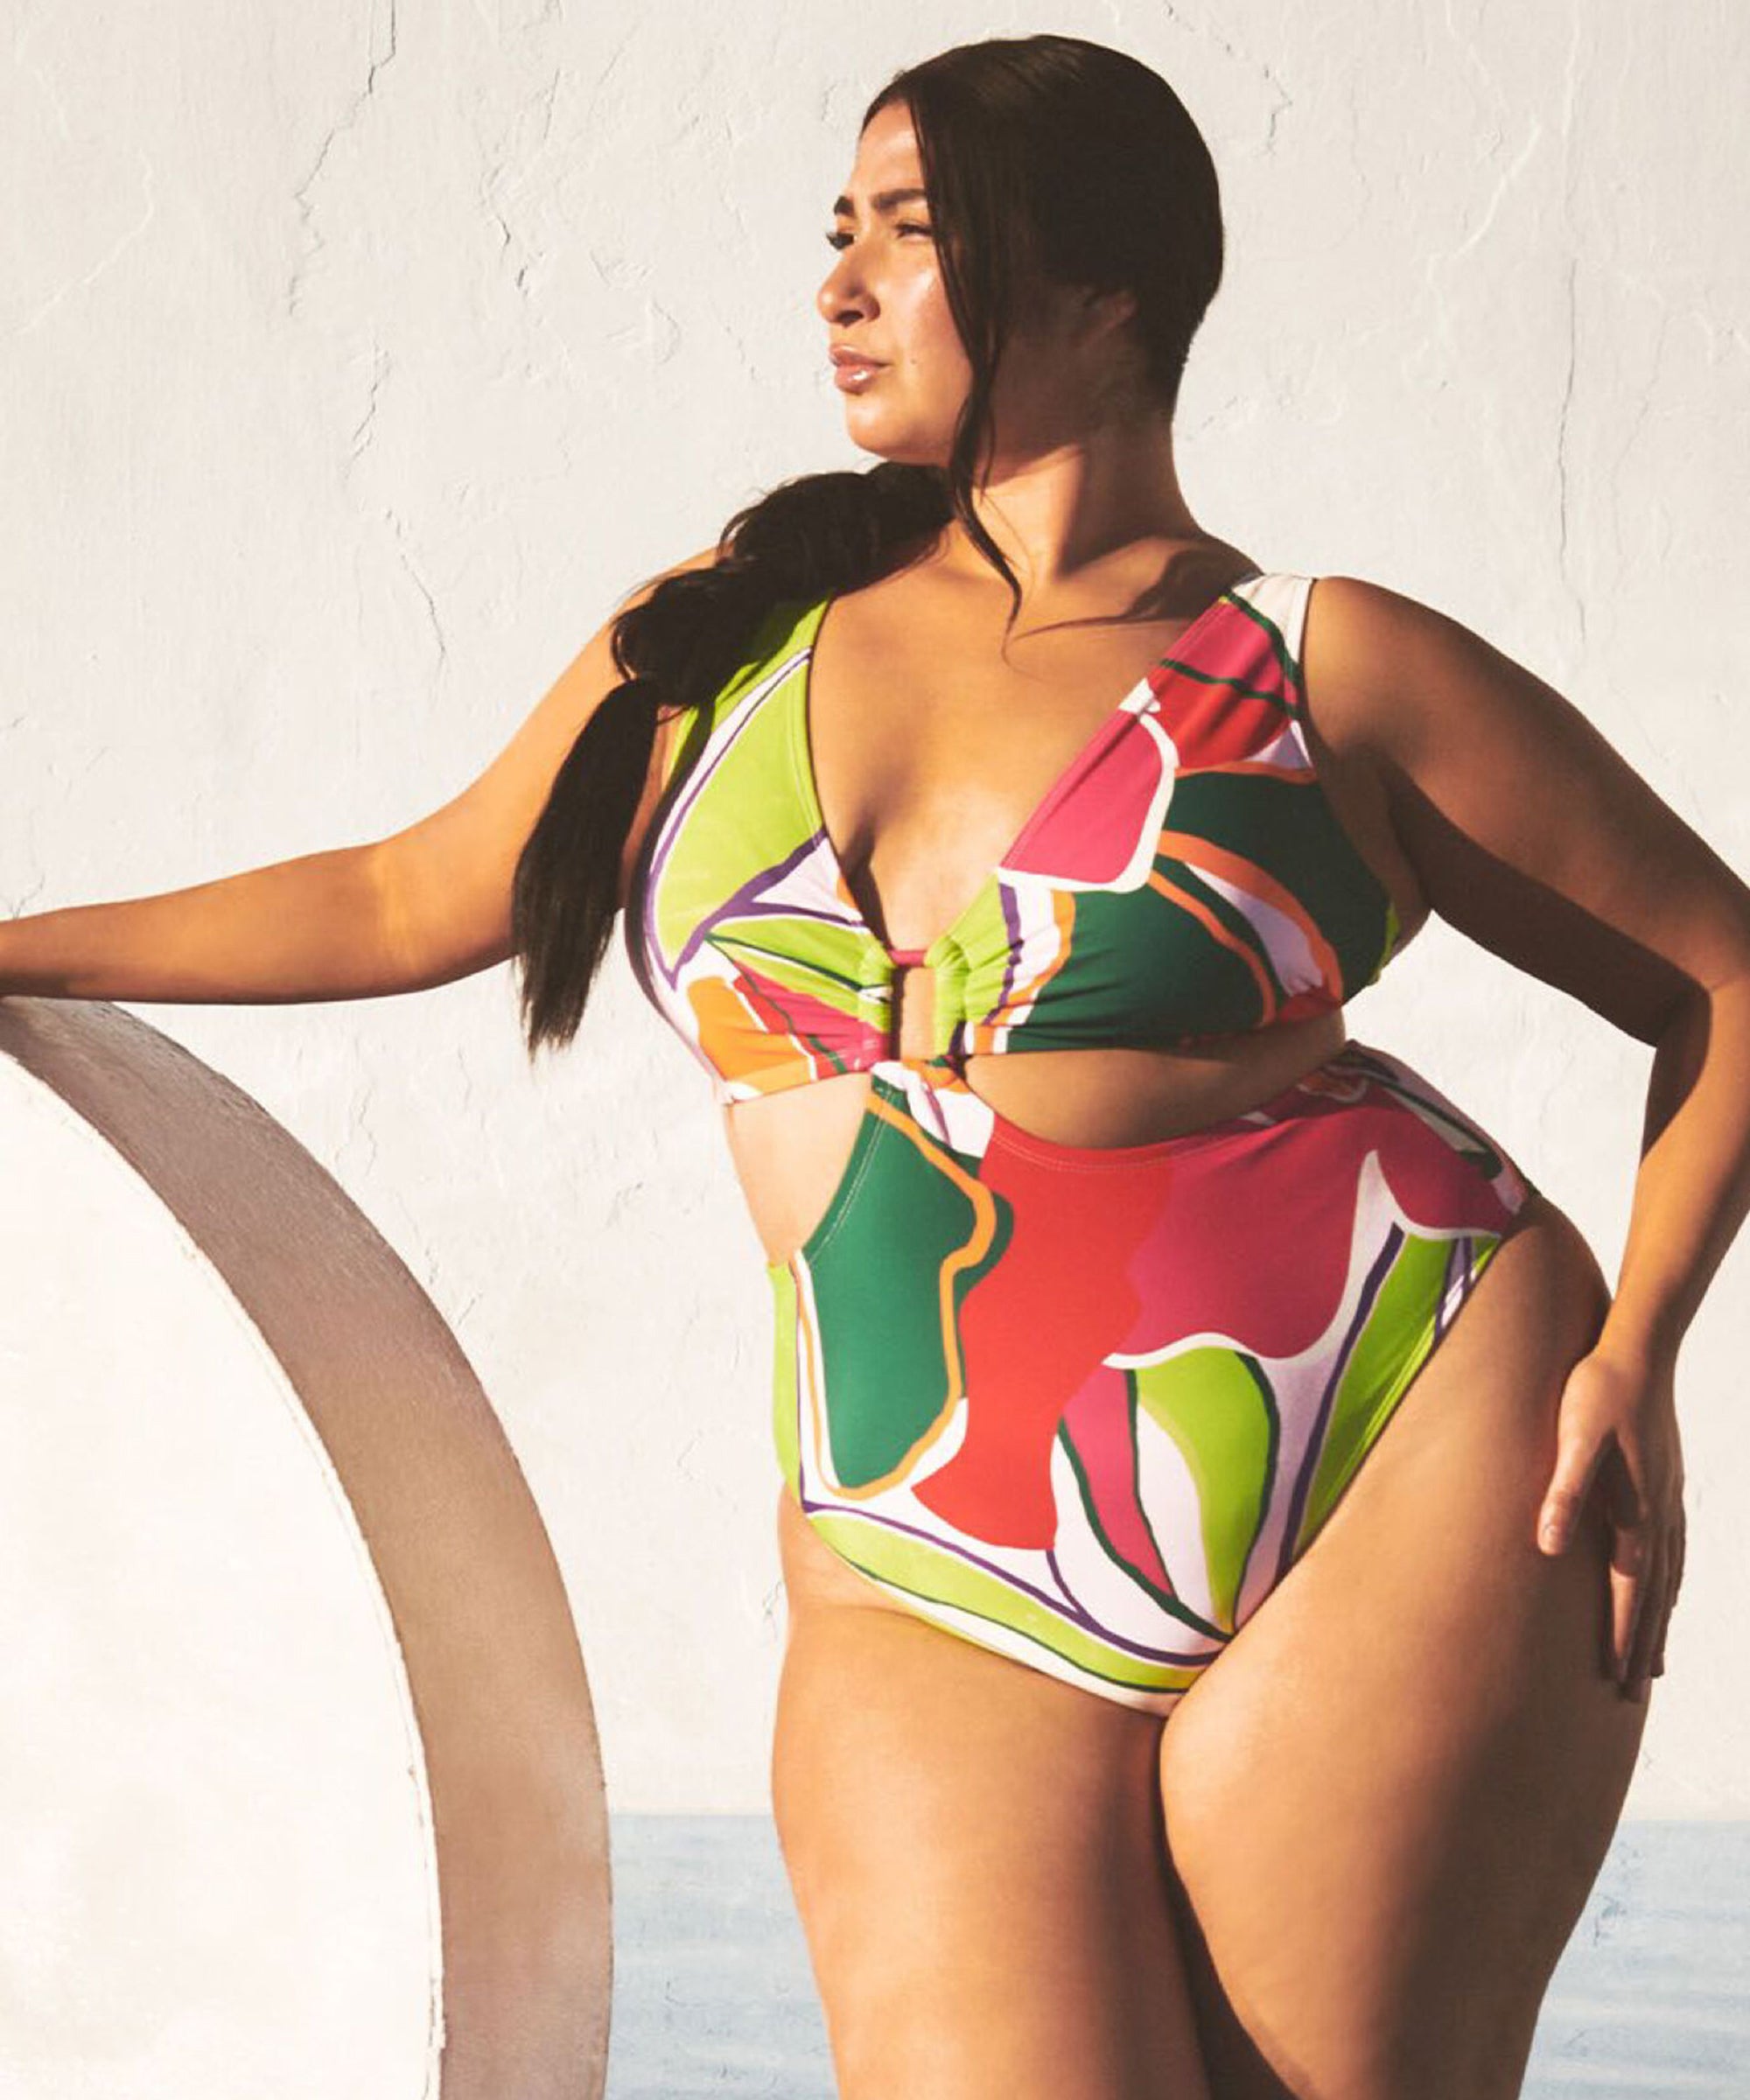 Best plus size swimwear brands for fuller busts and figures